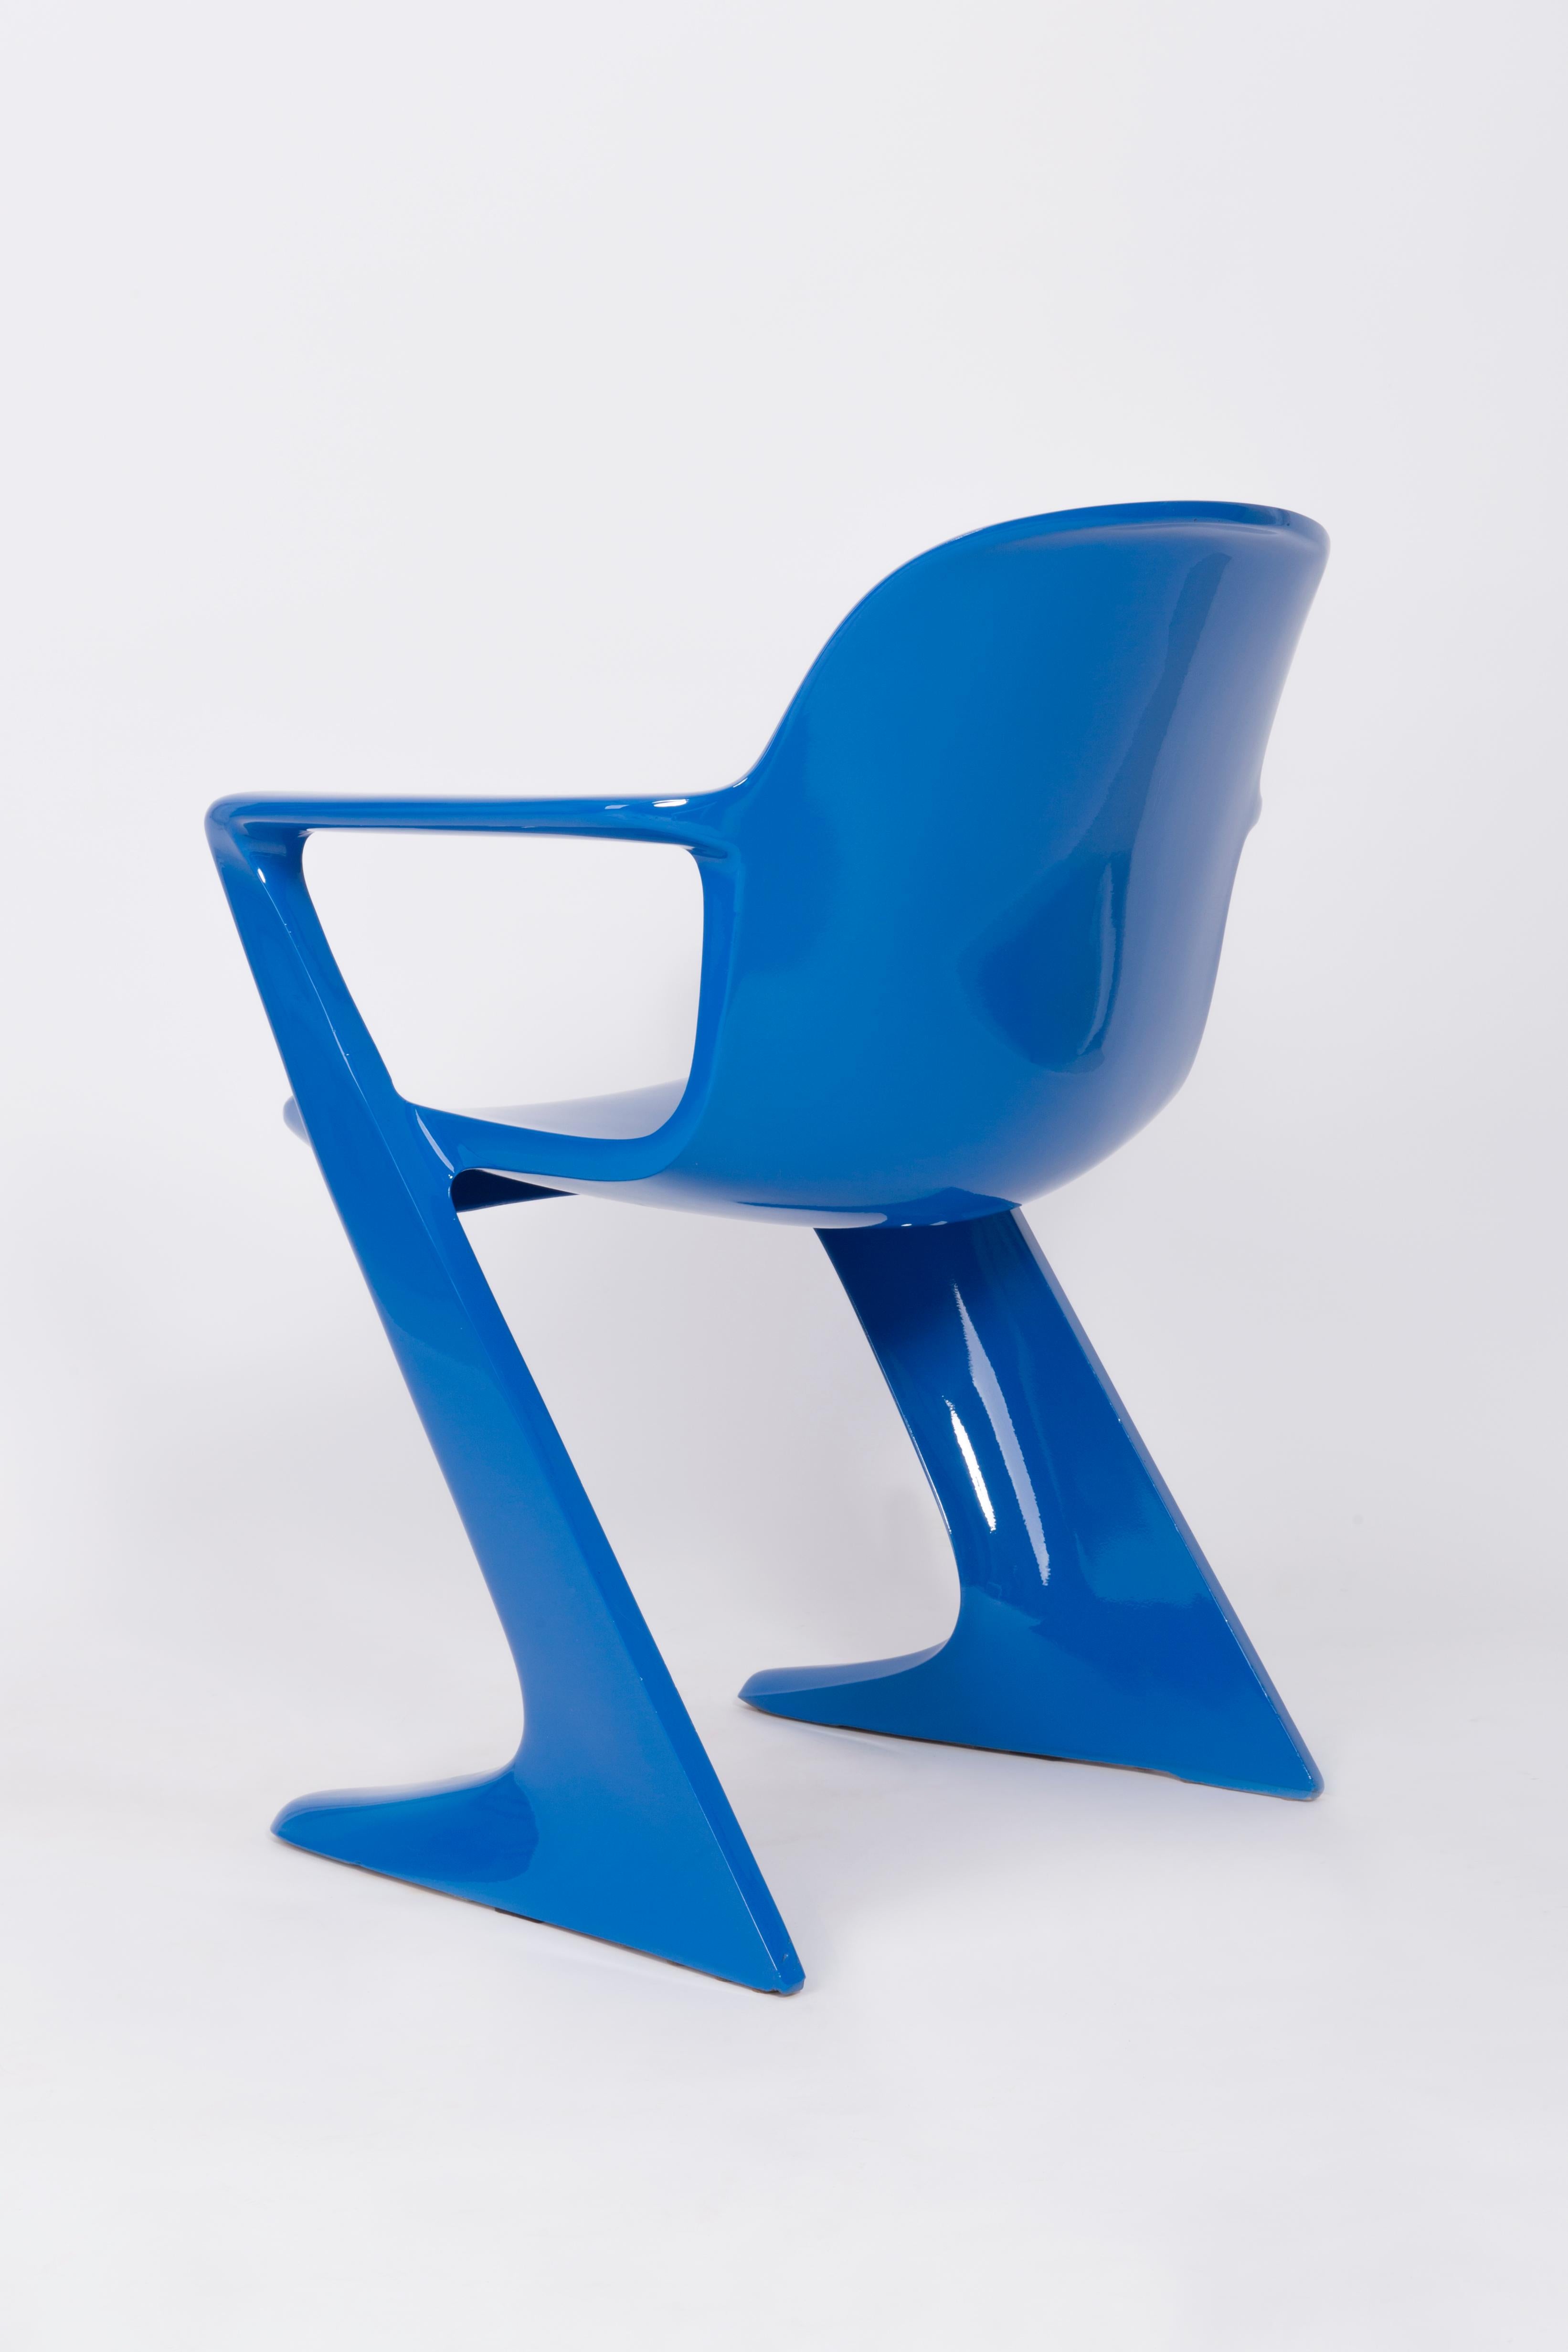 Set of Two Classic Blue Kangaroo Chairs Designed by Ernst Moeckl, Germany, 1968 For Sale 2